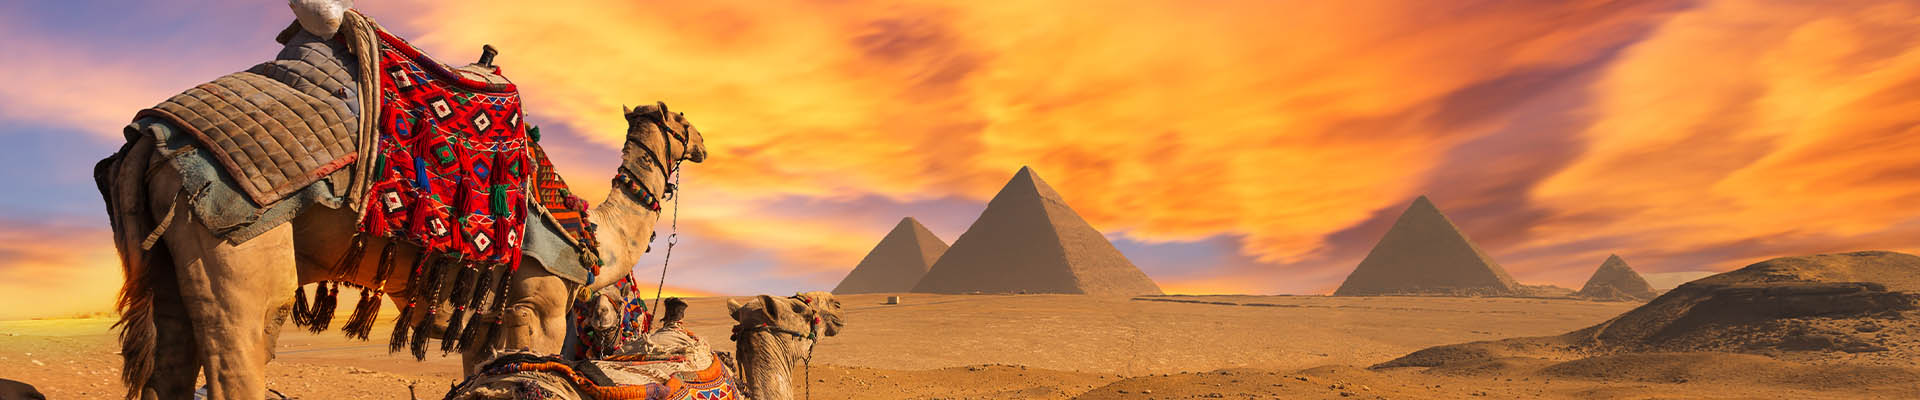 Luxury Small Israel, Jordan and Egypt 13 Day Tour with the Ancient Pyramids